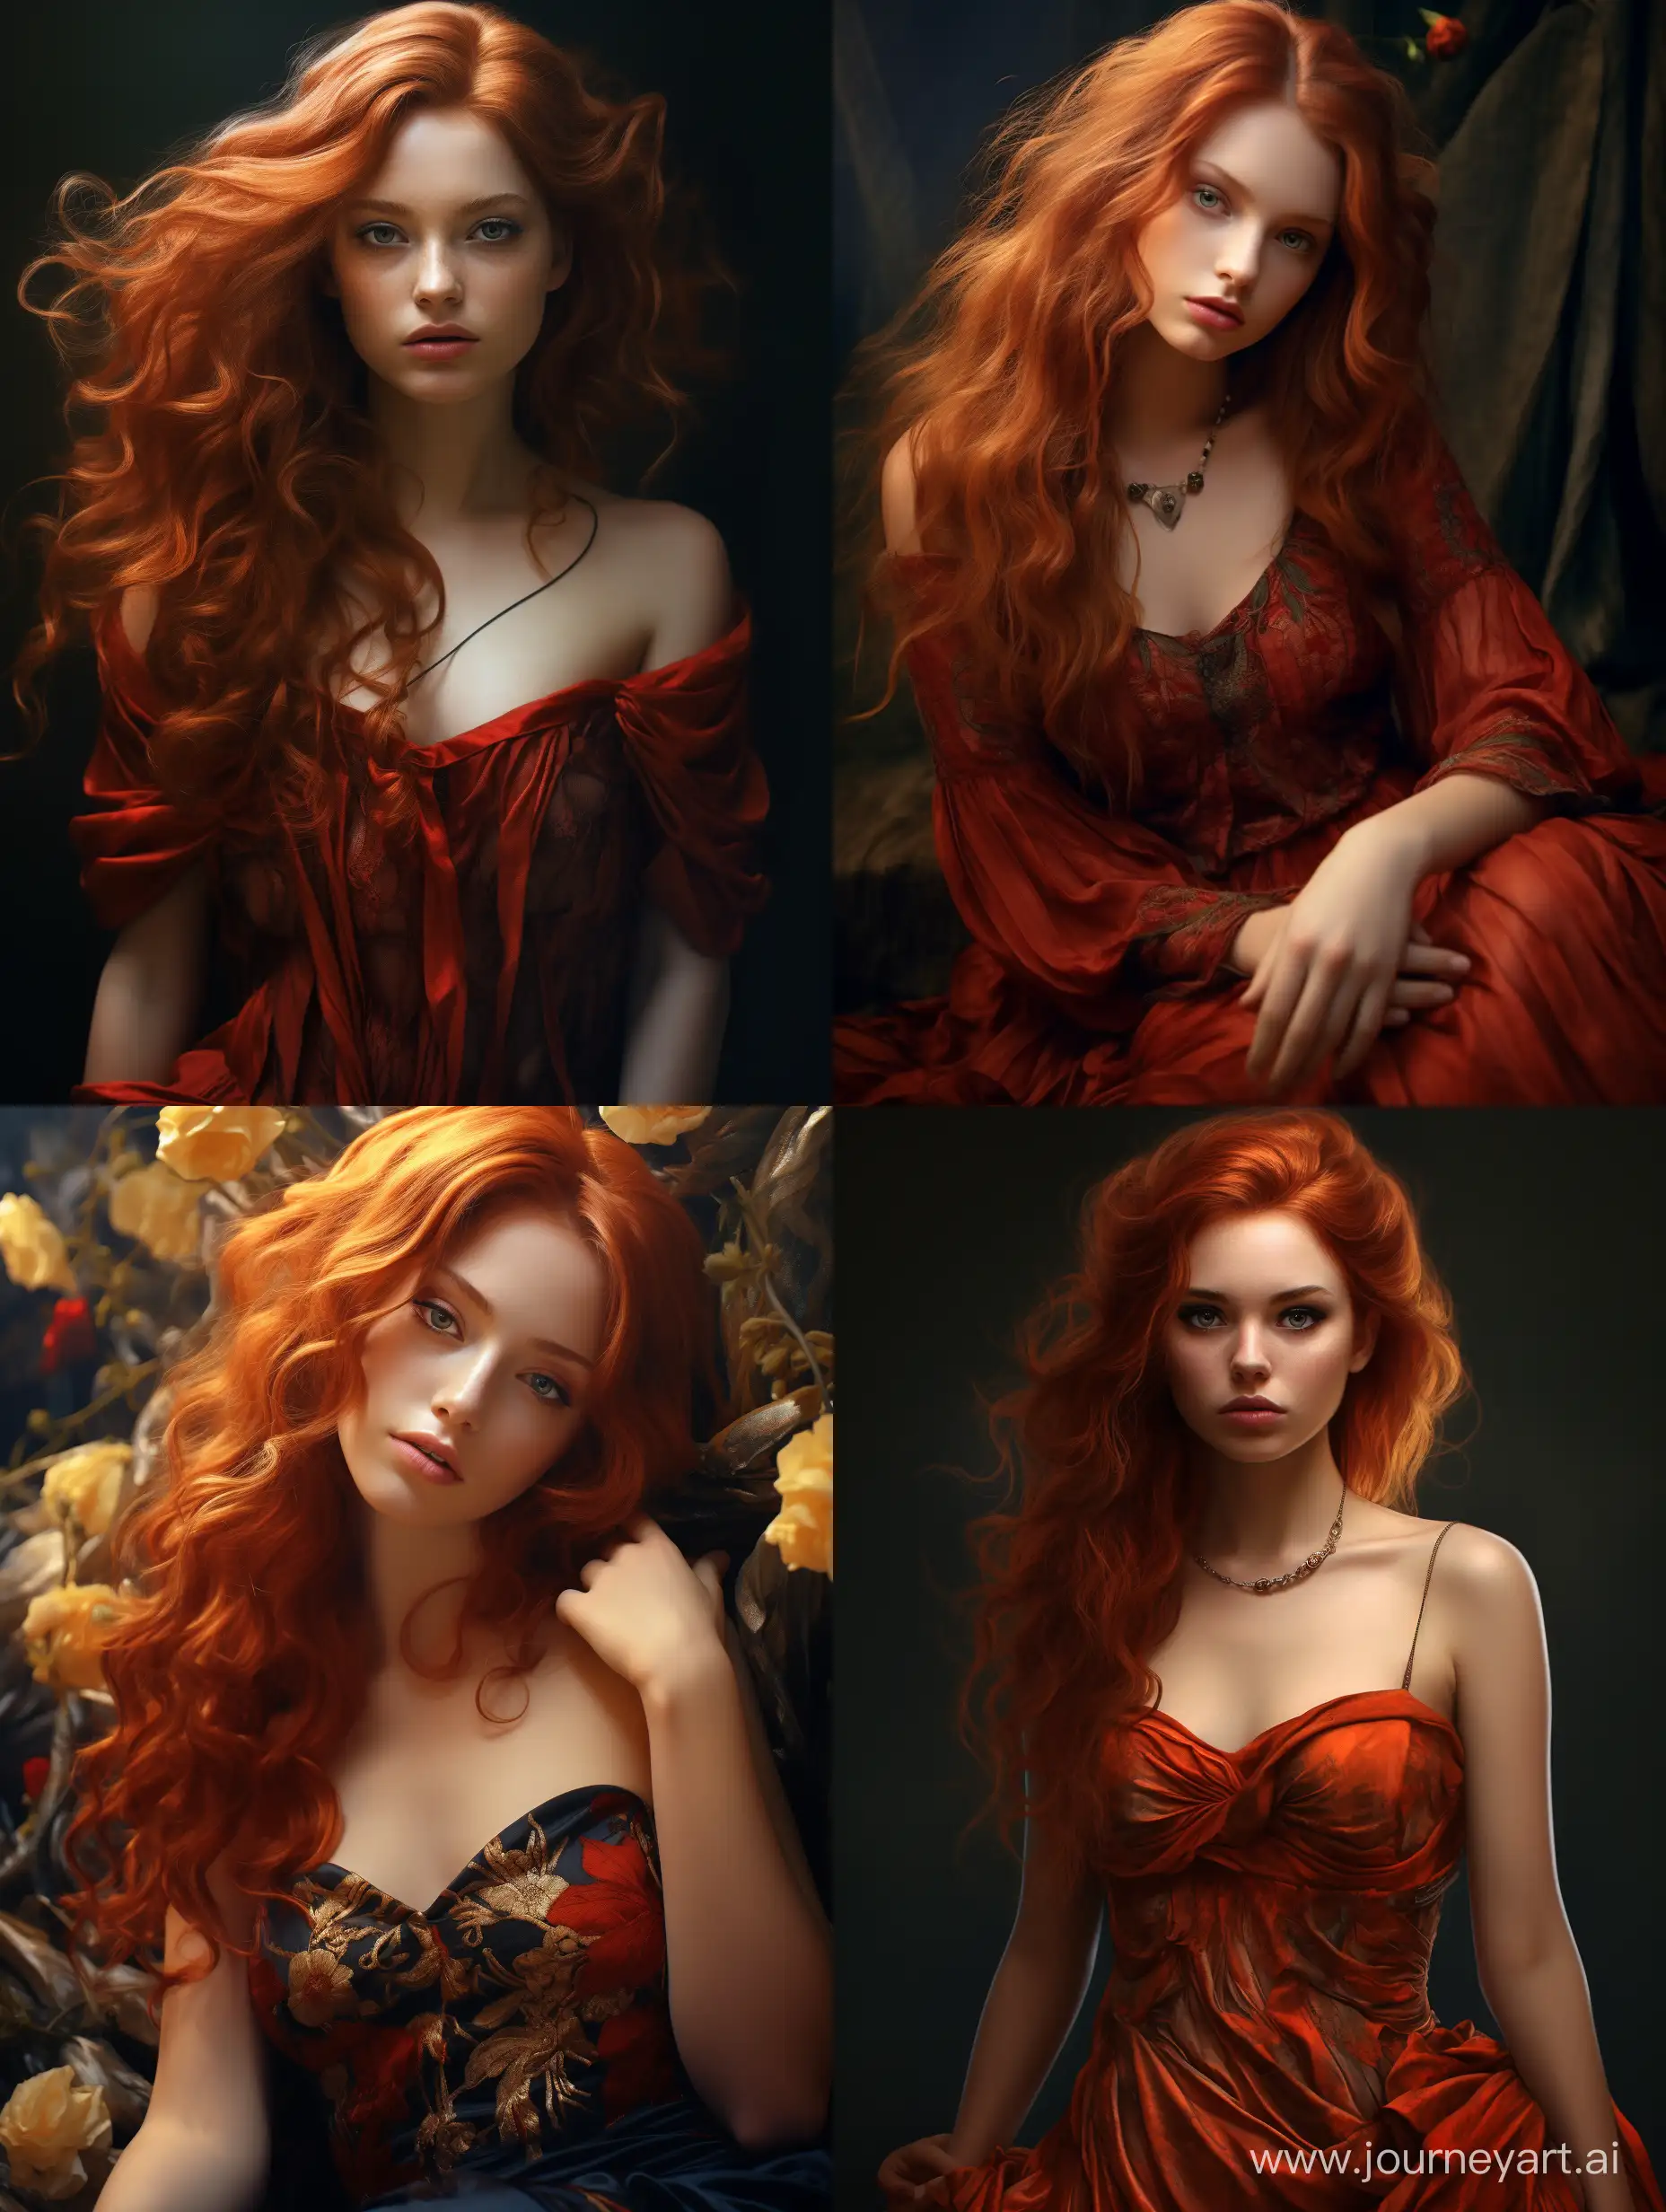 Elegant-RedHaired-Woman-in-Stunning-Dress-HighDefinition-Detailed-Portrait